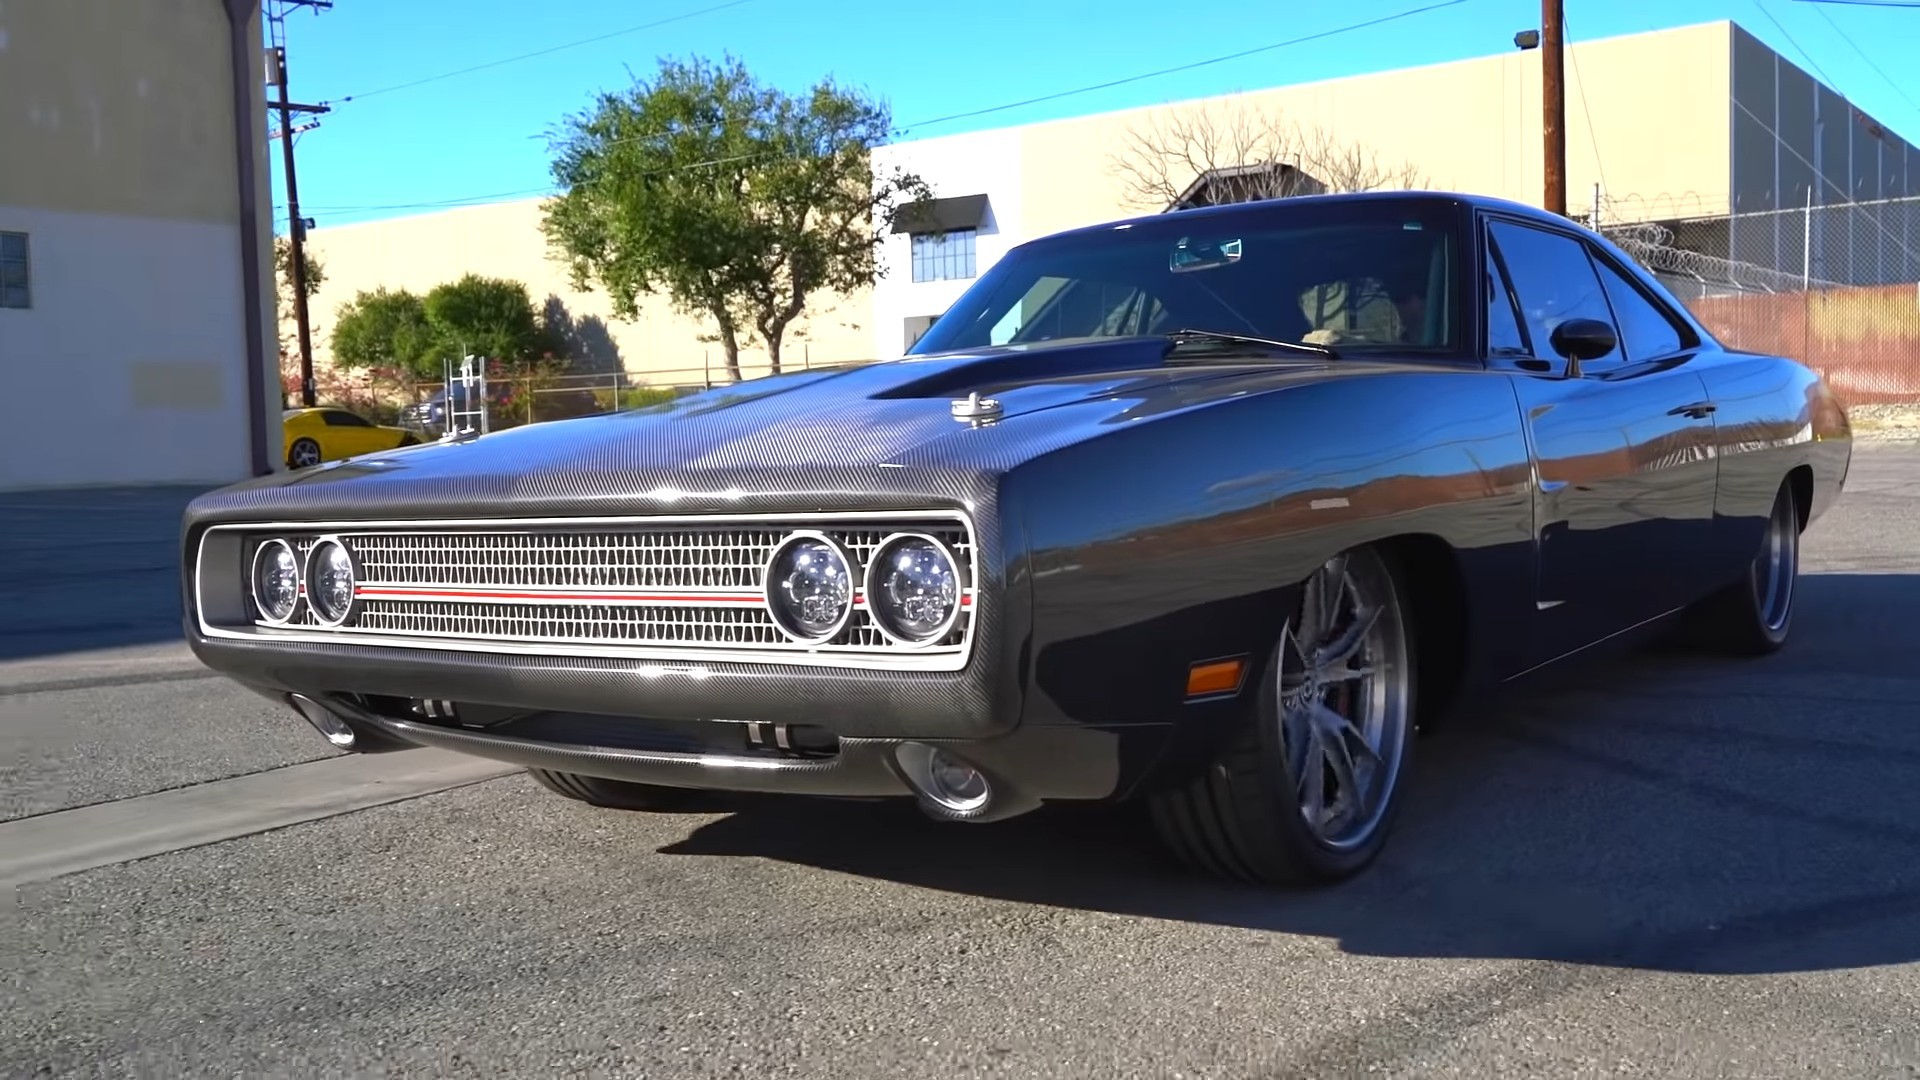 Vin Diesel’s Birthday Beast: Unveiling the 1,650hp Monster Dodge Charger